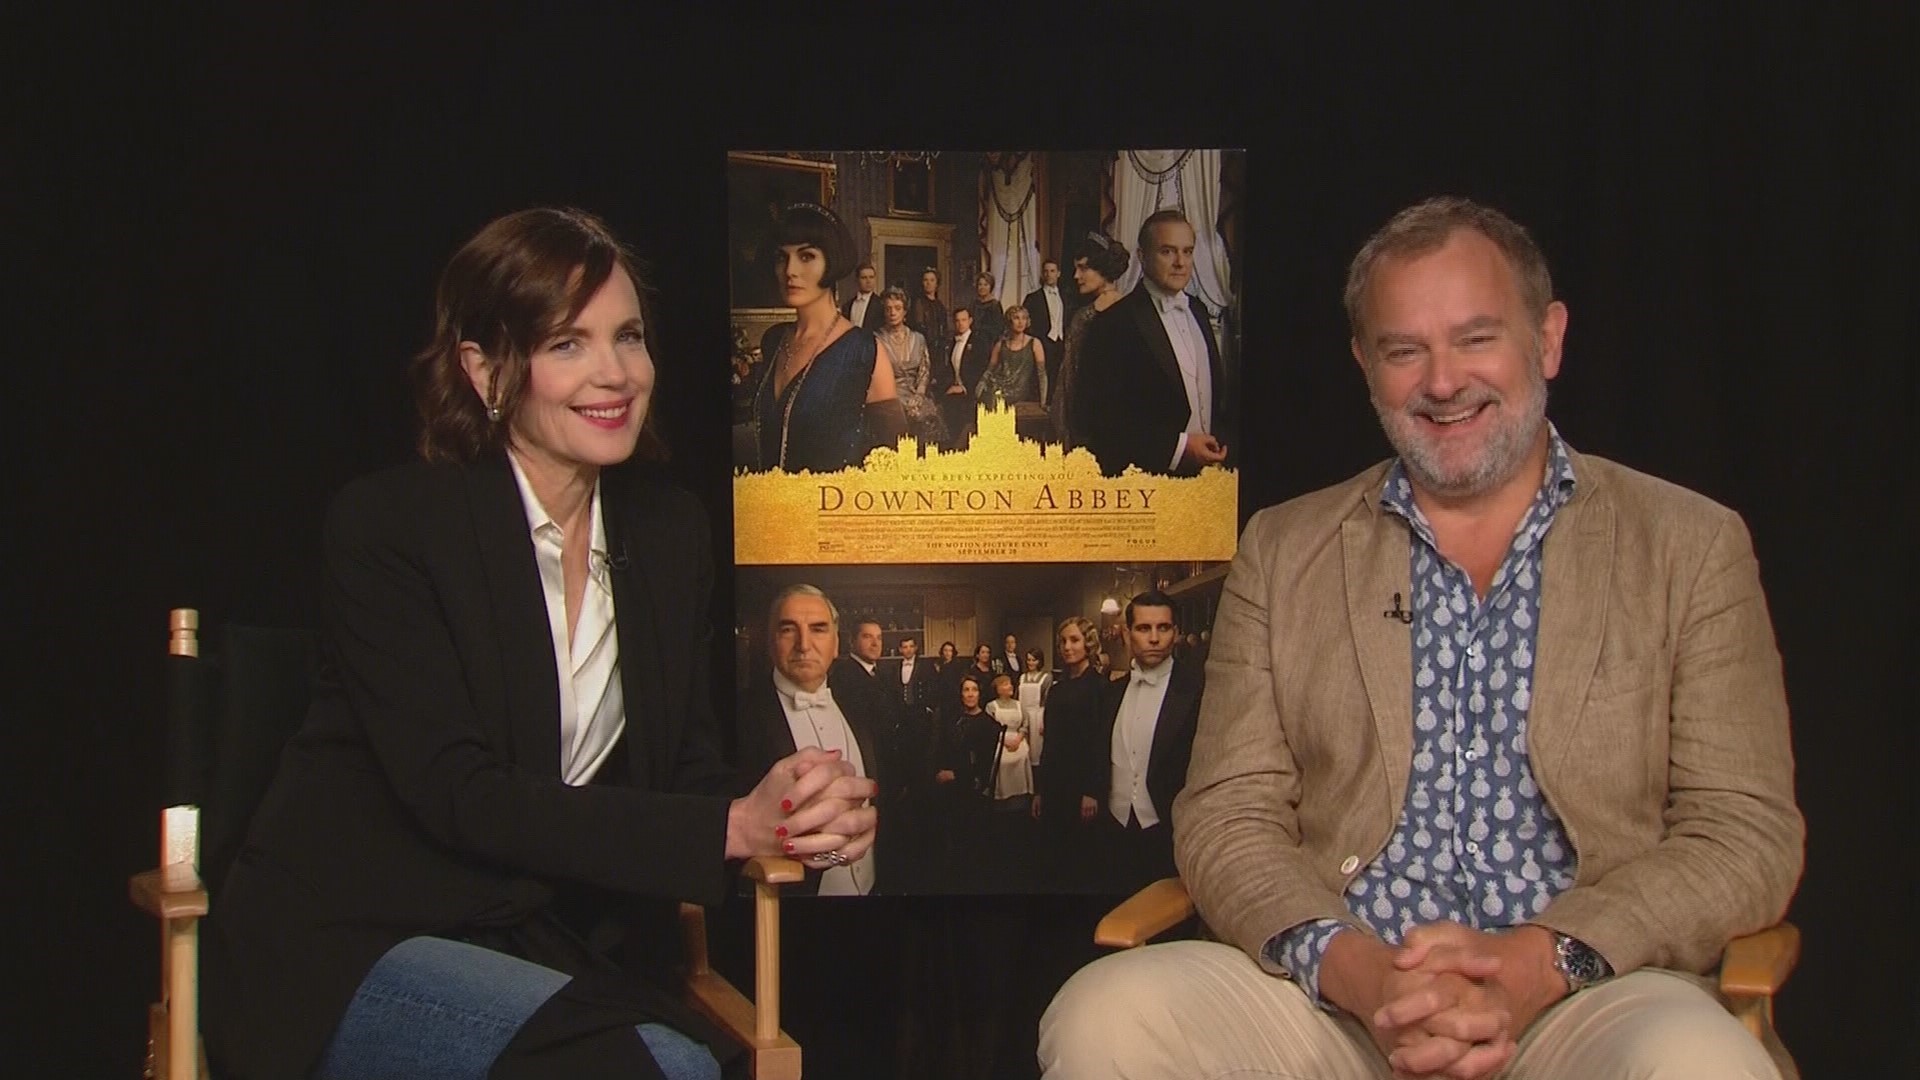 Hugh Bonneville & Elizabeth McGovern talk with Jim Dever about their upcoming film.